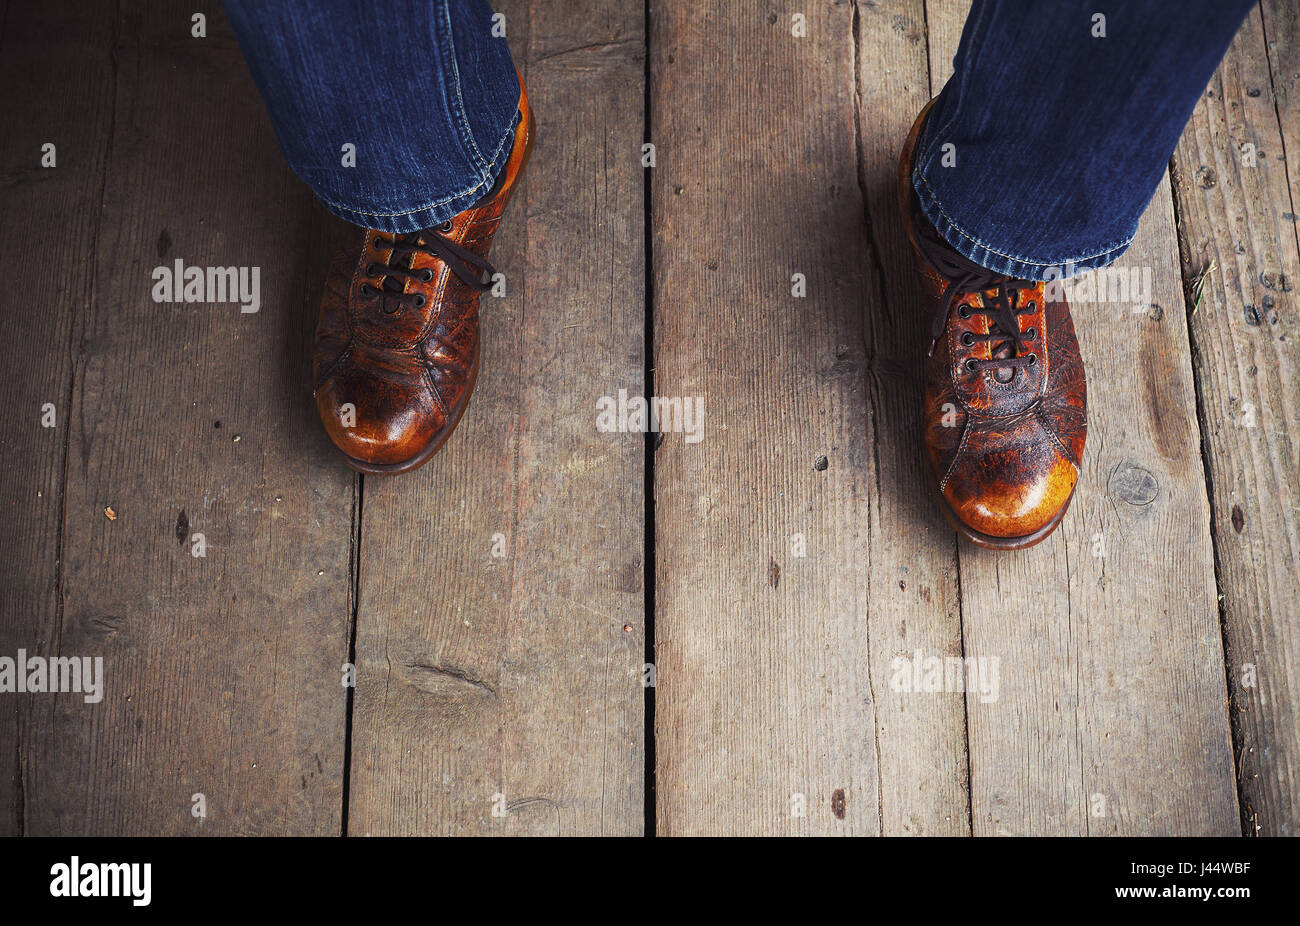 Man in interesting brown shows on wooden floor. Stock Photo